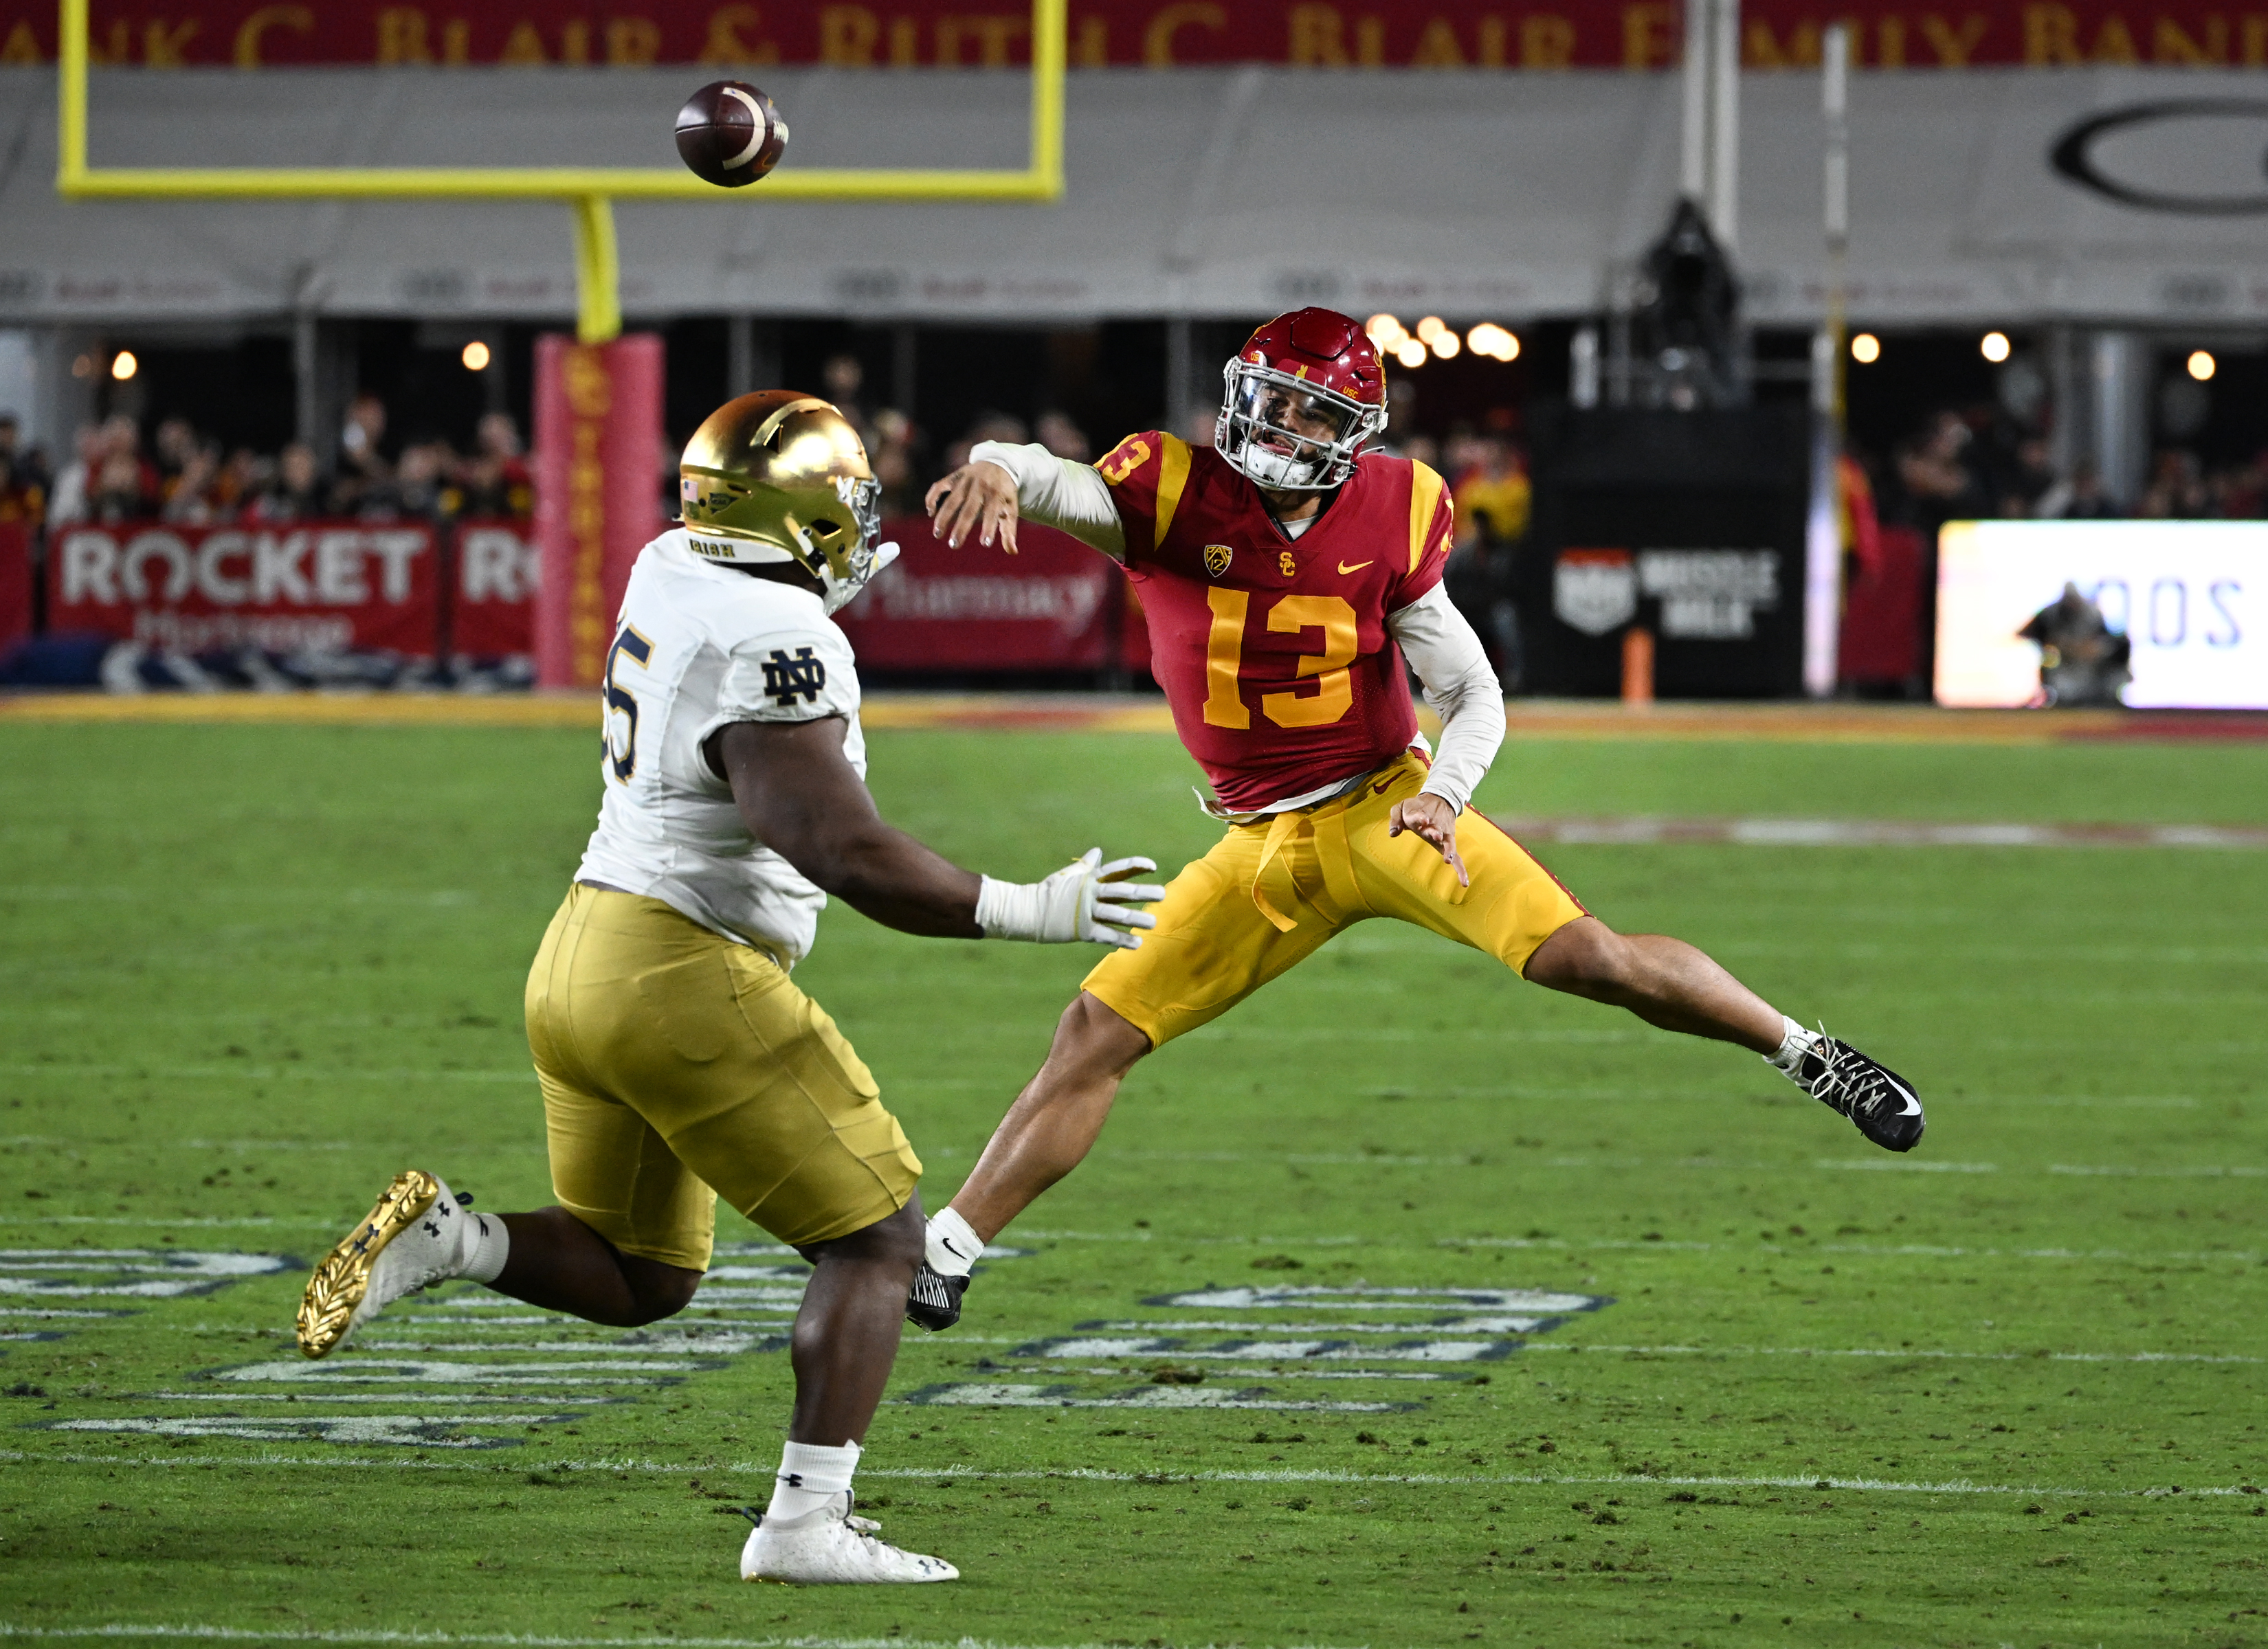 COLLEGE FOOTBALL: NOV 26 Notre Dame at USC